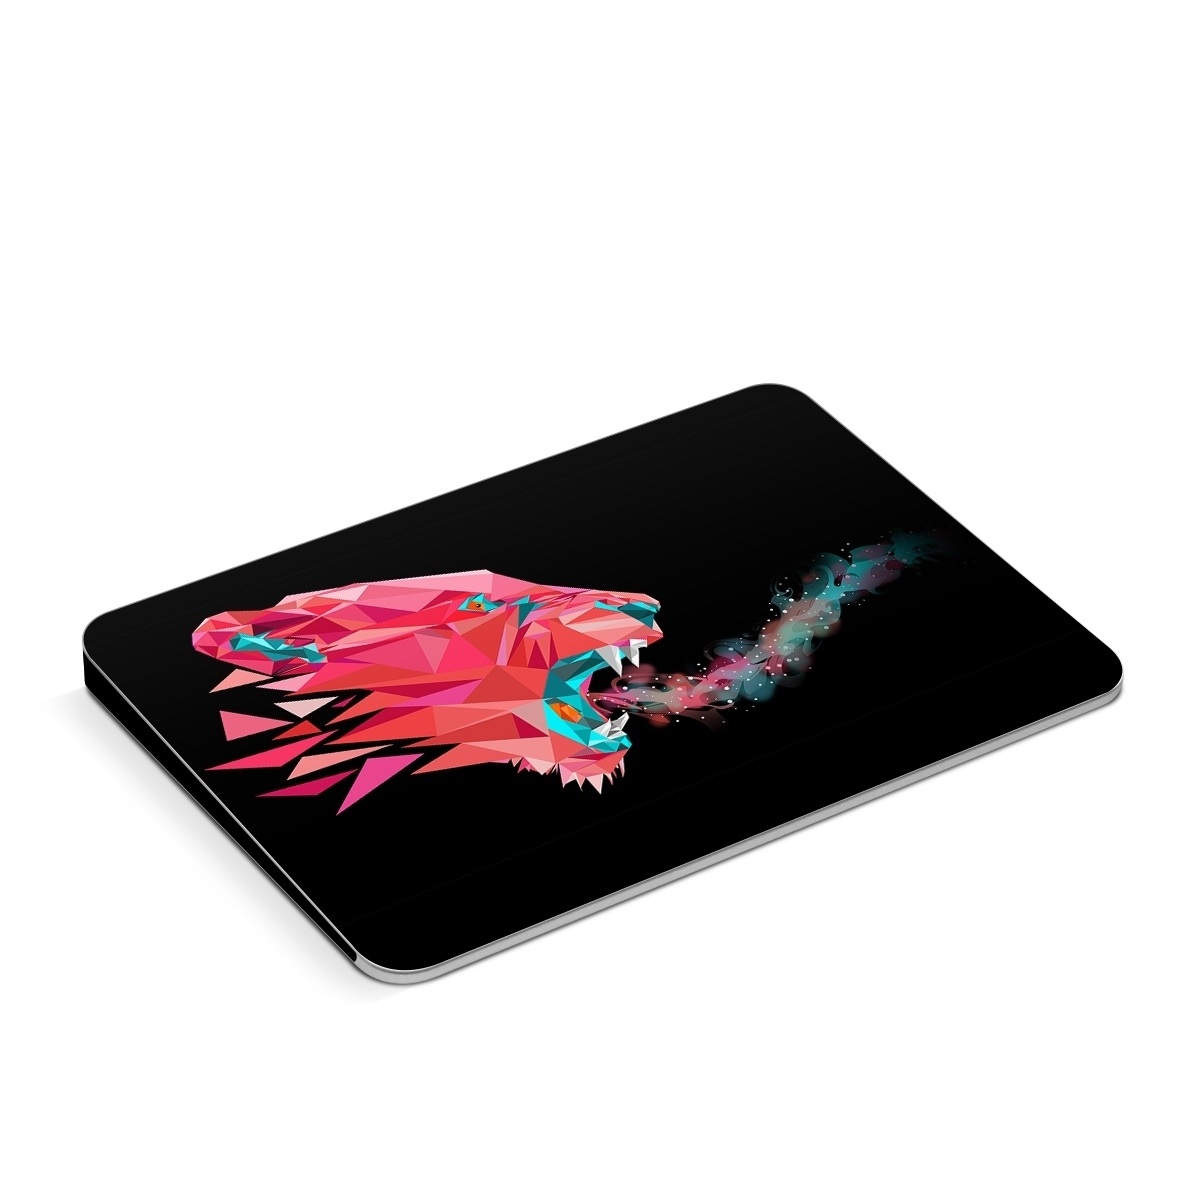 Apple Magic Trackpad Skin design of Pink, Graphic design, Illustration, Design, Organism, Graphics, Font, Art, Animation, Pattern, with black, red, pink, gray colors